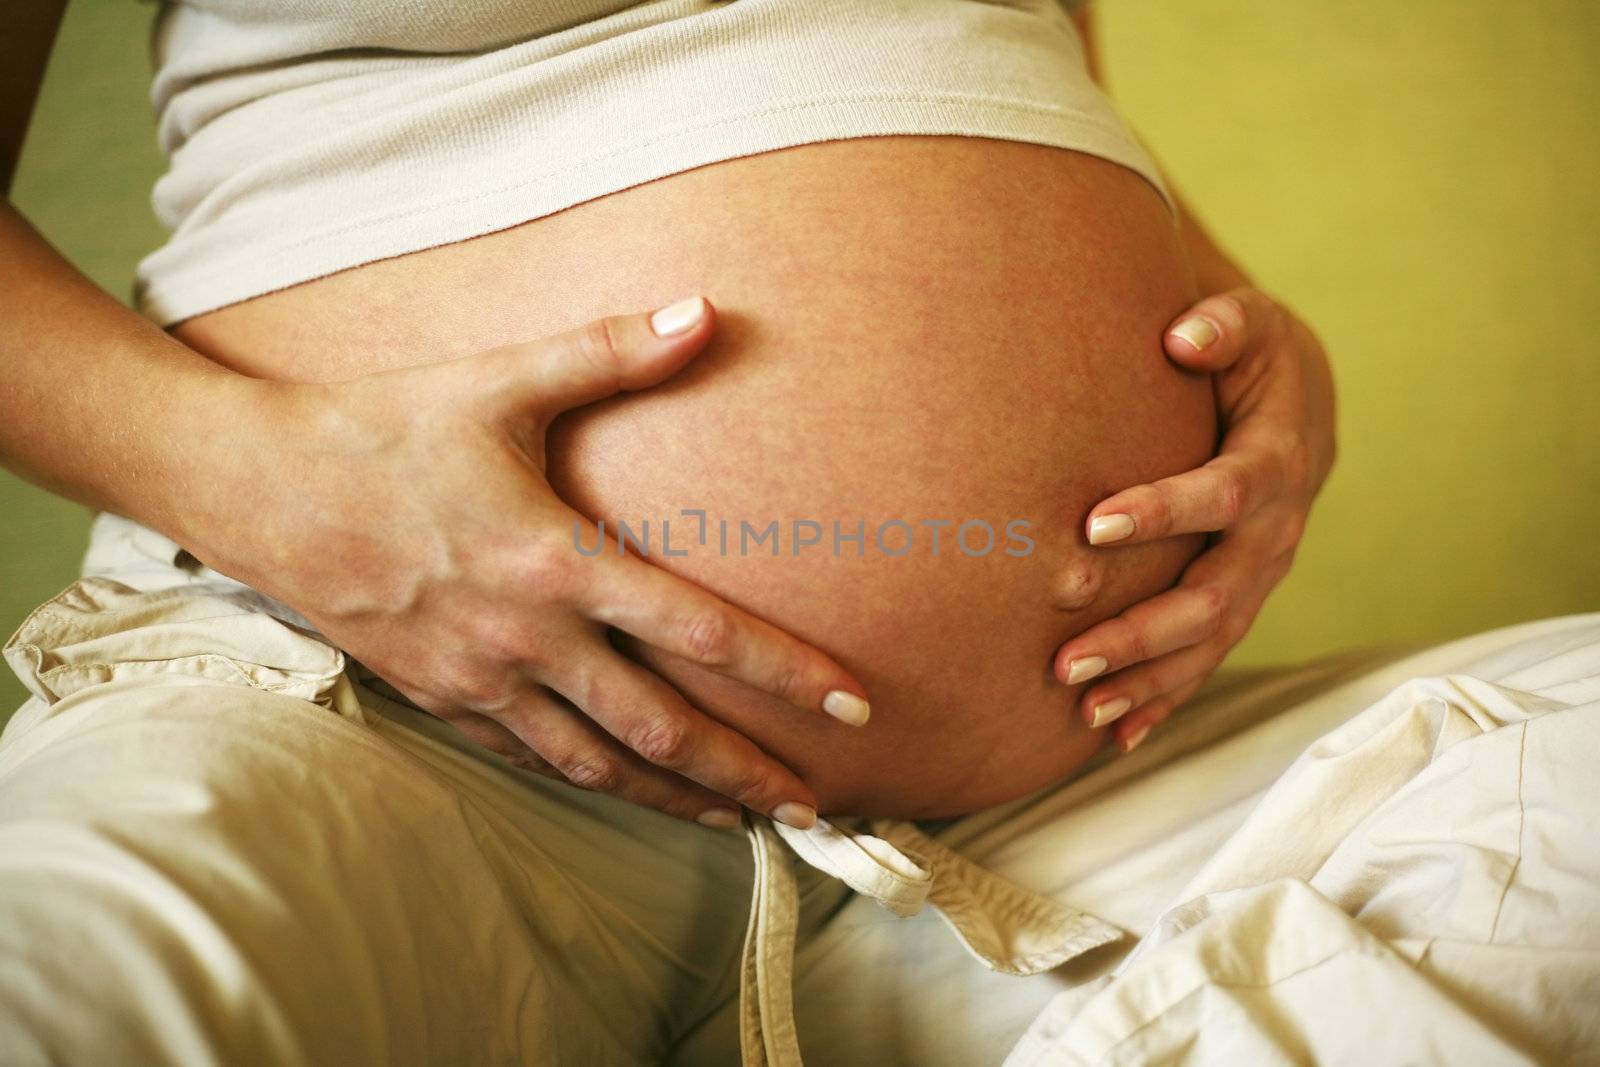 The pregnant woman on the ninth month. The child will be born one of these days